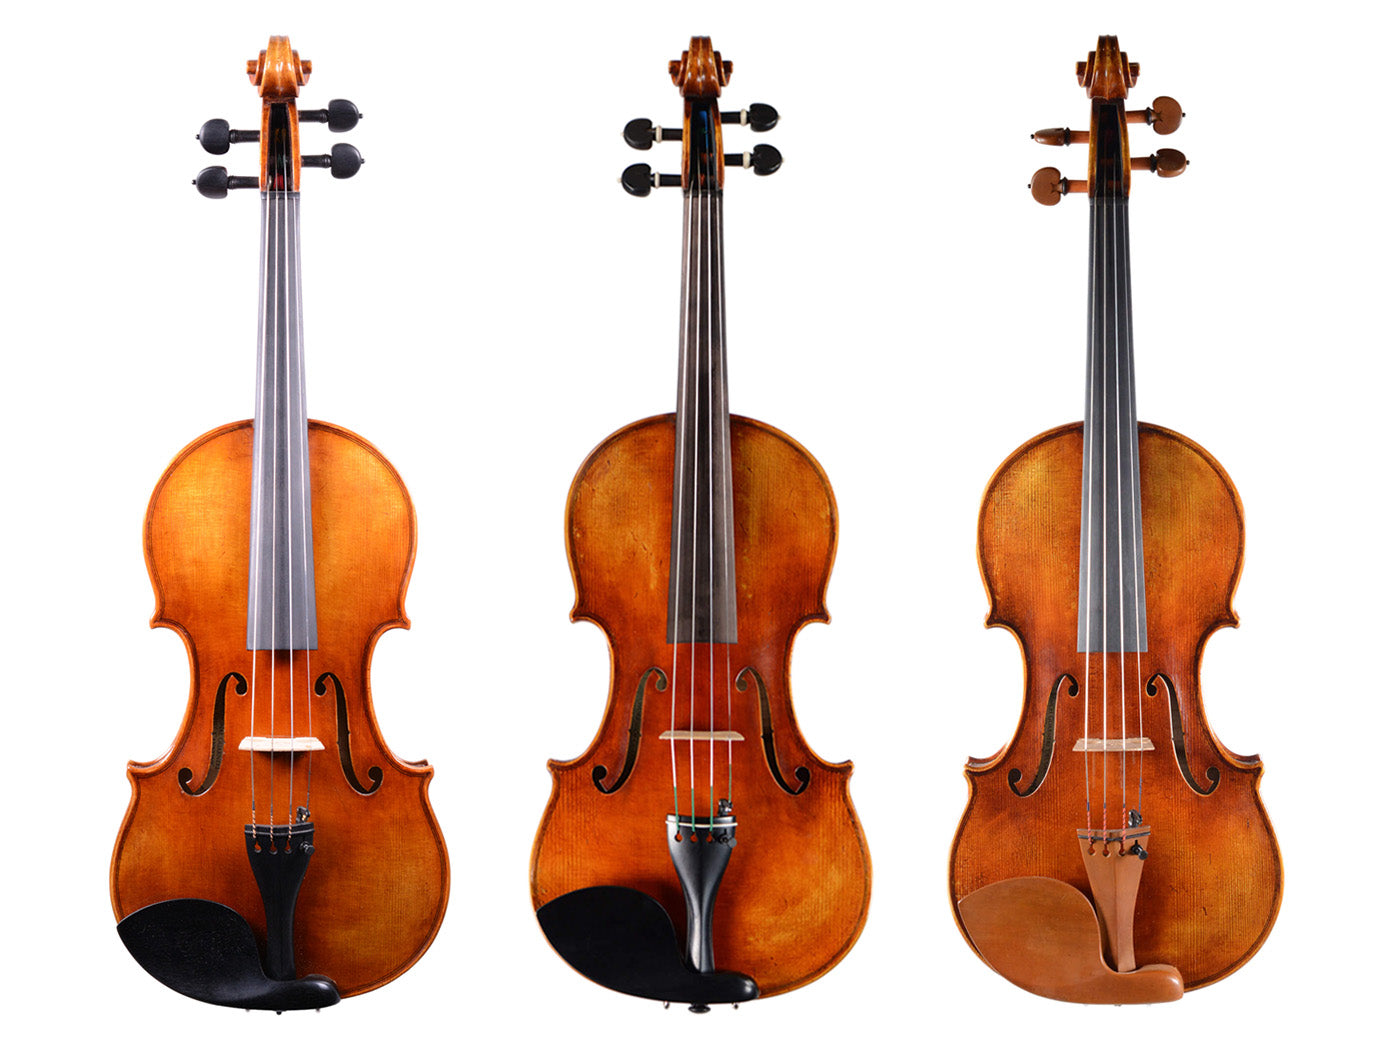 Holstein Violins - Traditional, Workshop, and Bench